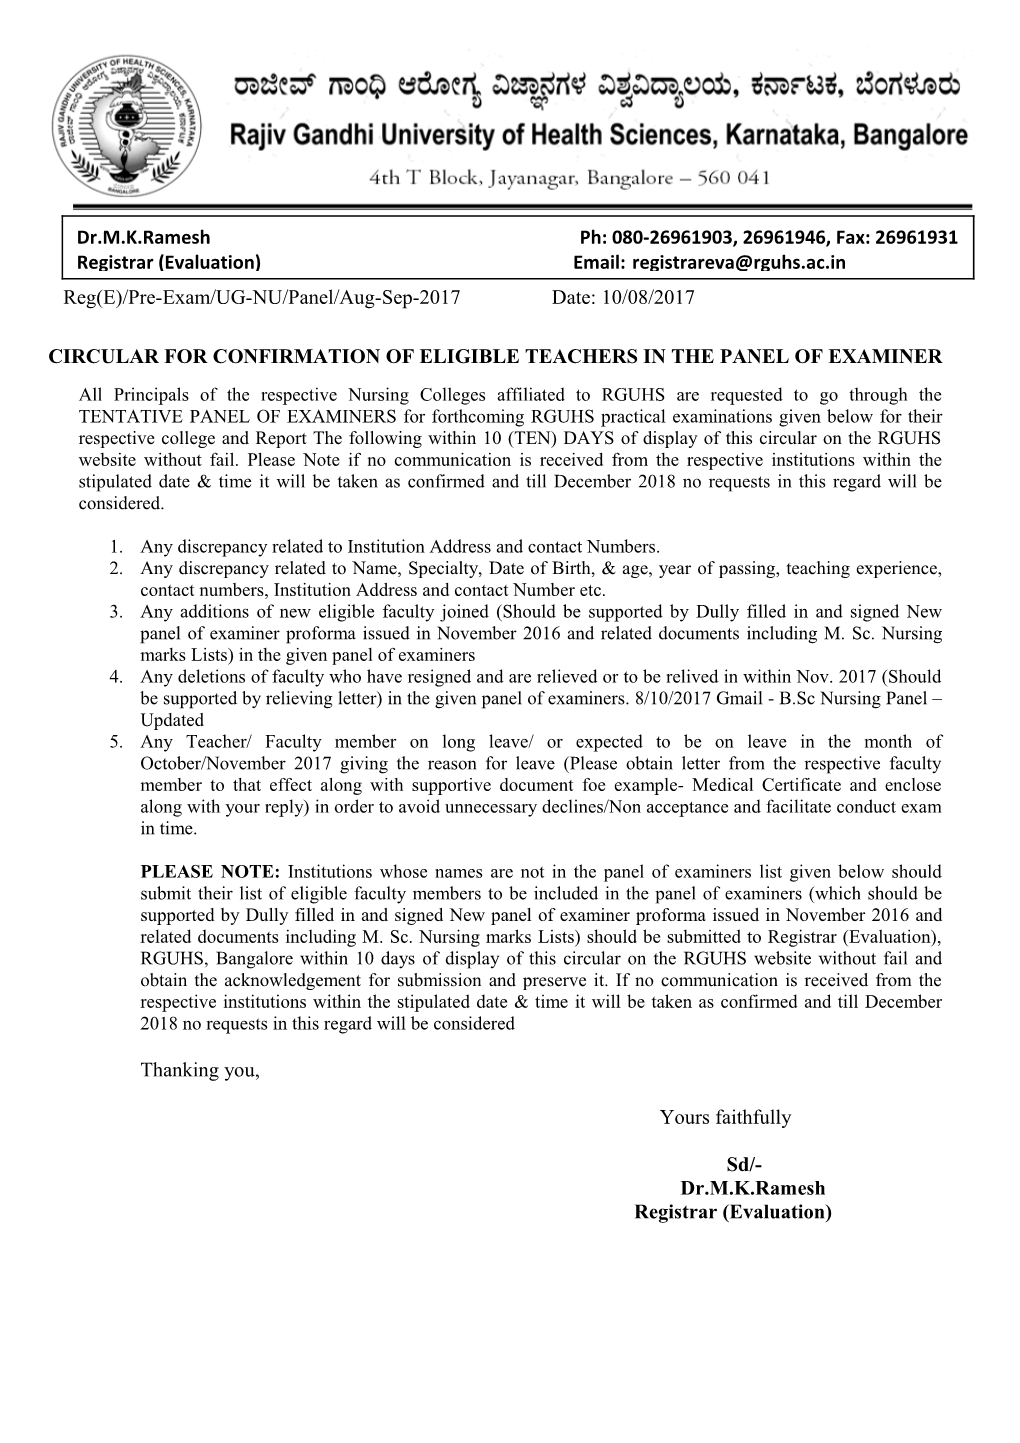 Circular for Confirmation of Eligible Teachers in the Panel of Examiner